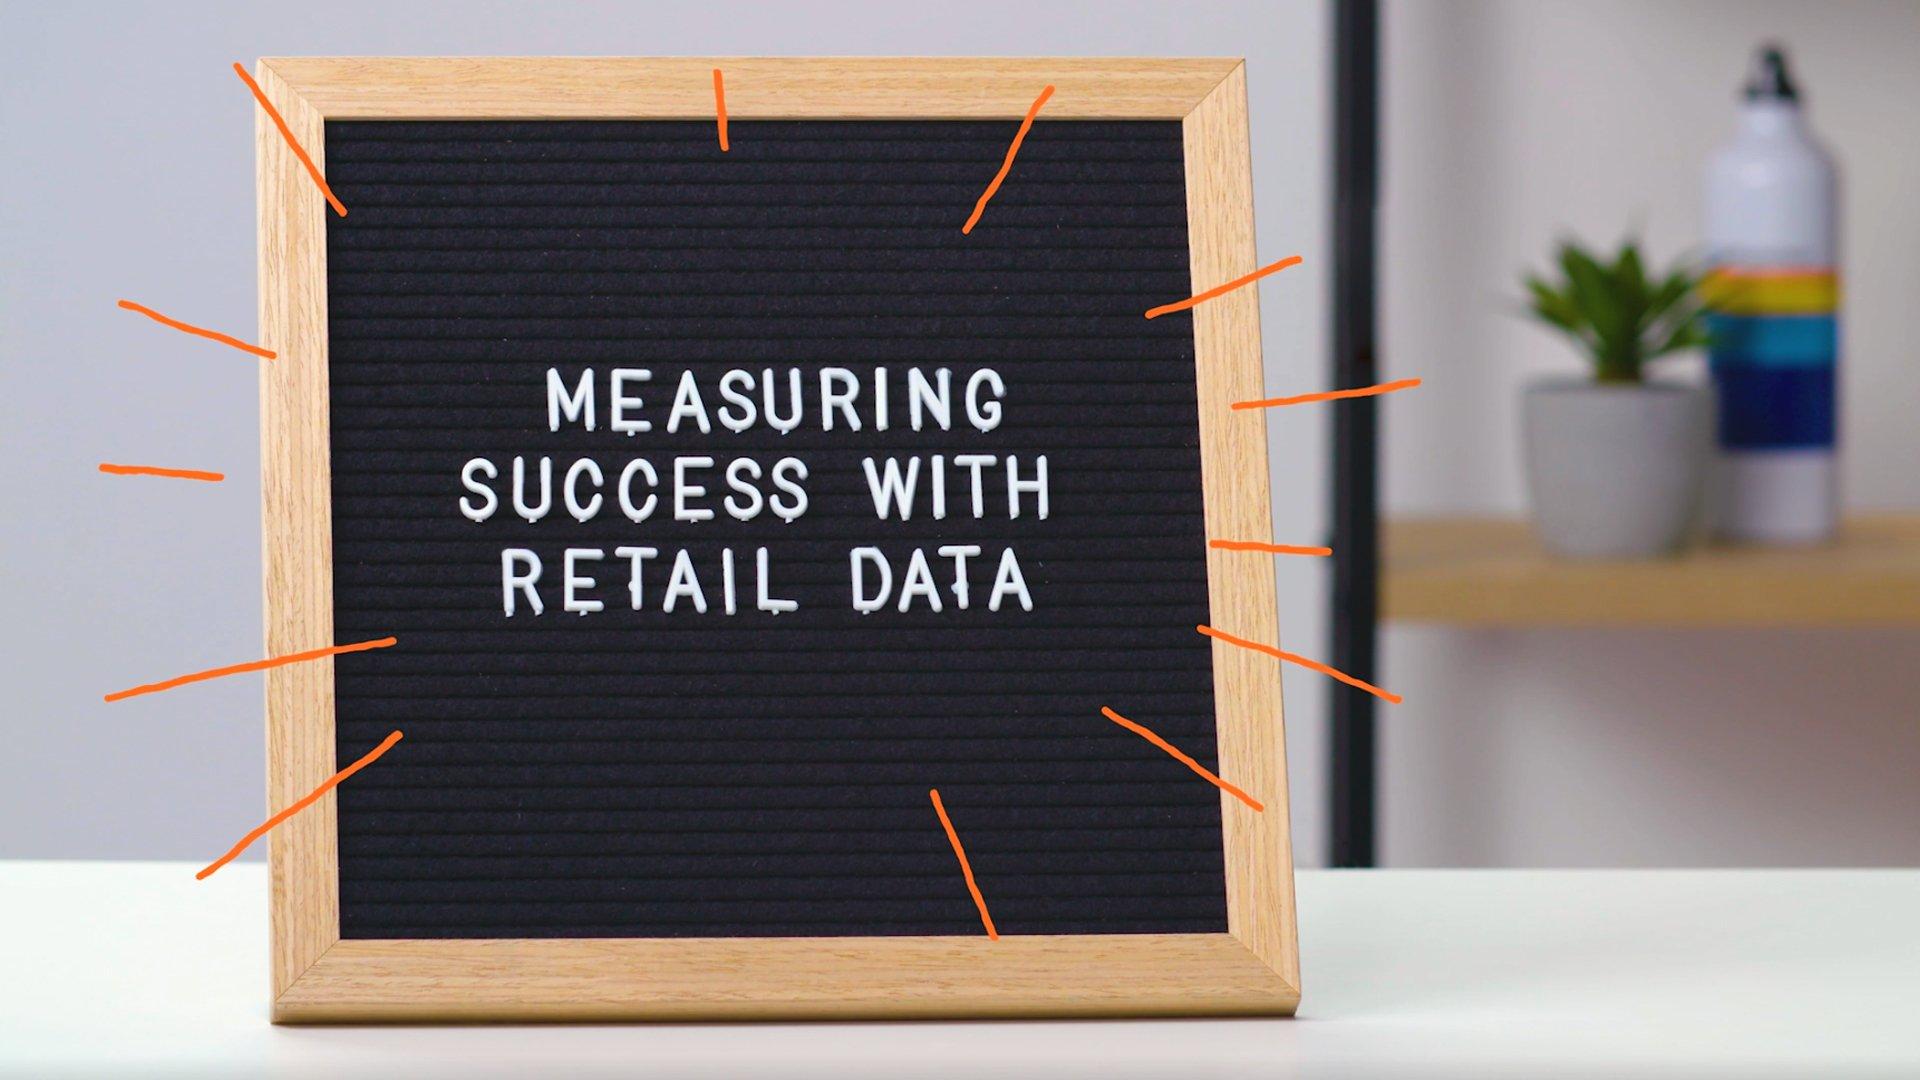 Bulletin board with text that says "Measuring Success with Retail Data"